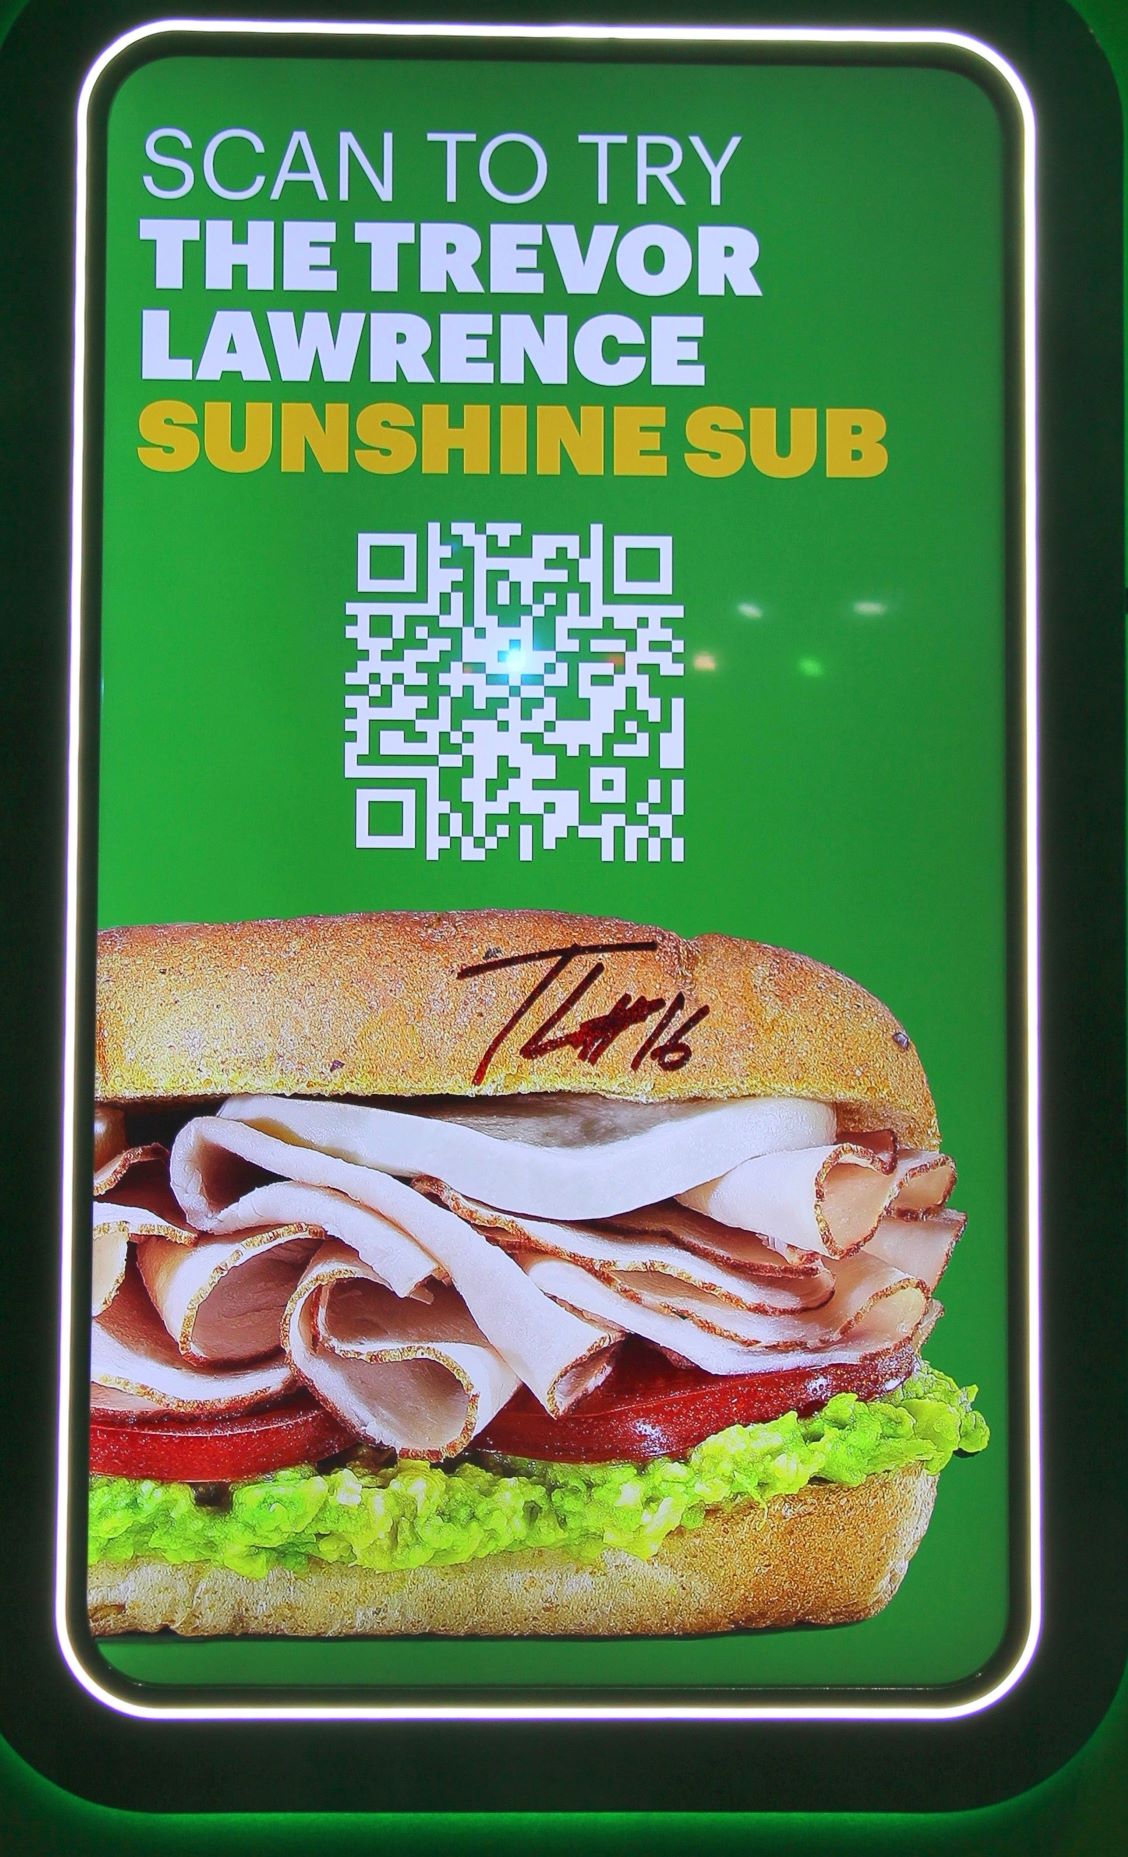 Subway Super Bowl Template A compressed